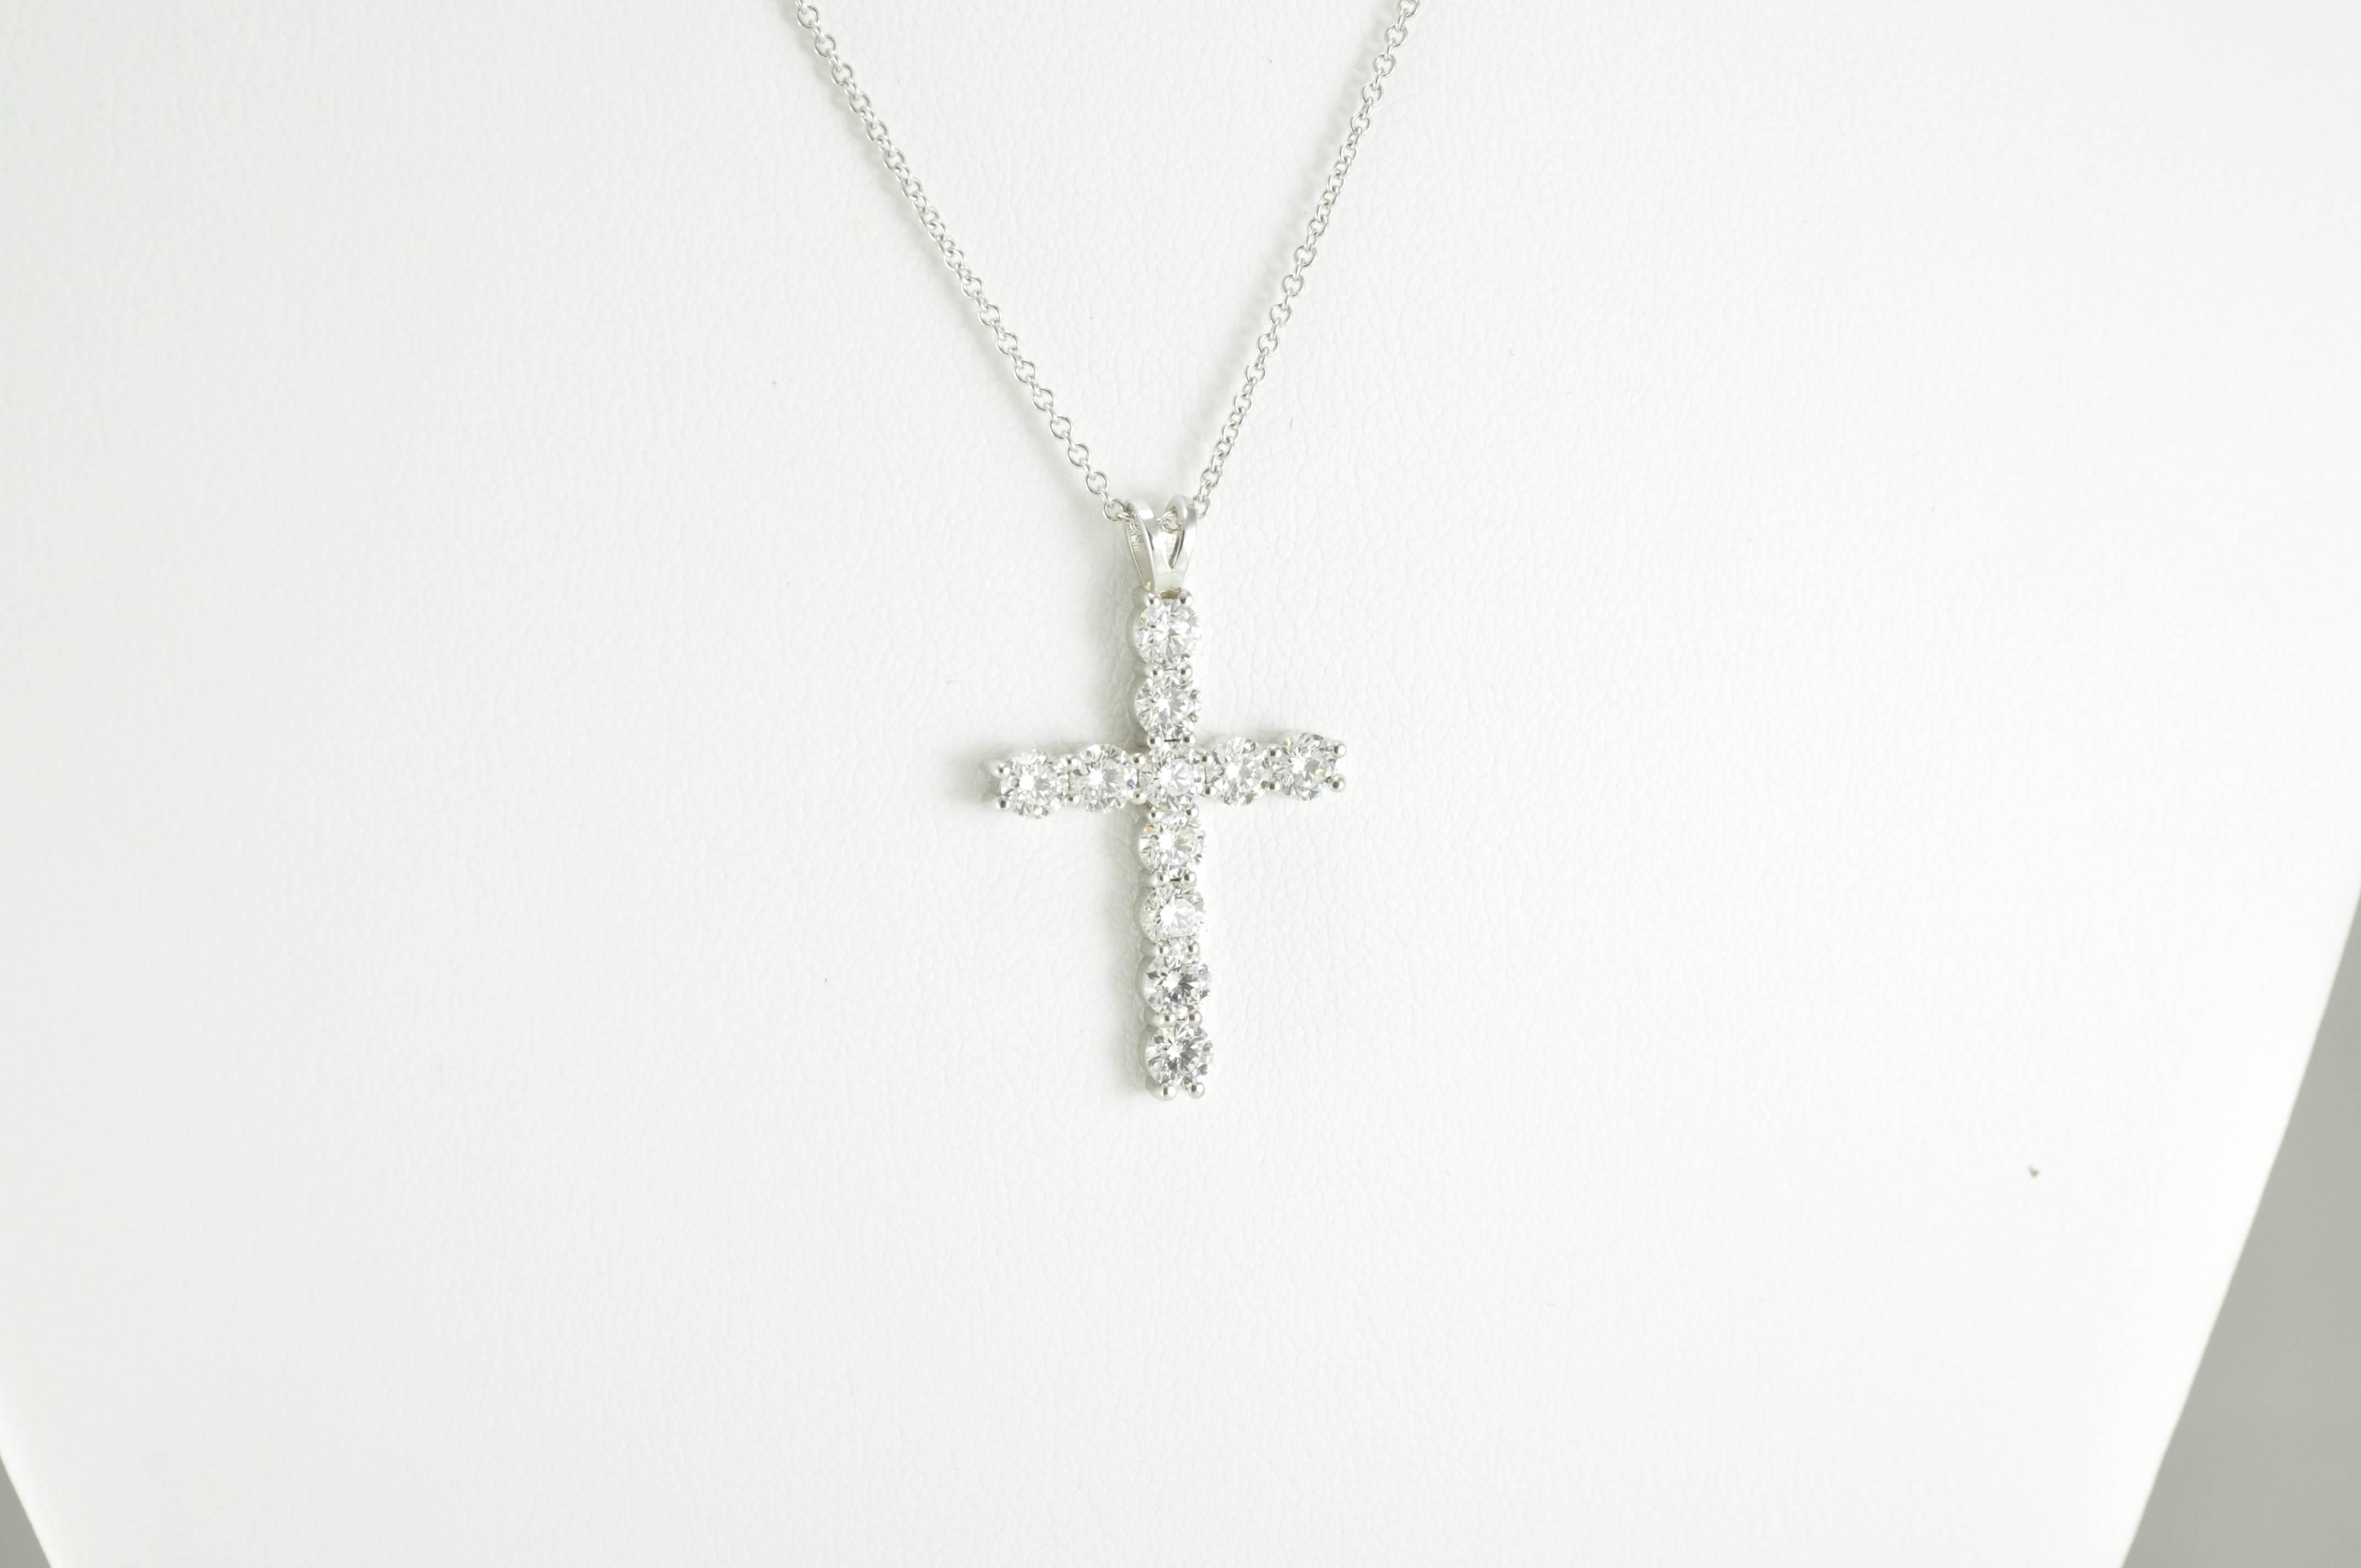 14k White Gold Diamond Cross consisting of 1.97ct in 11 round brilliant cut stones measuring 3.5 mm each.
The cross itself measures 1.13 inch tall, 0.75 inches wide and 0.13 inches deep. The chain itself measures 16 inches long.